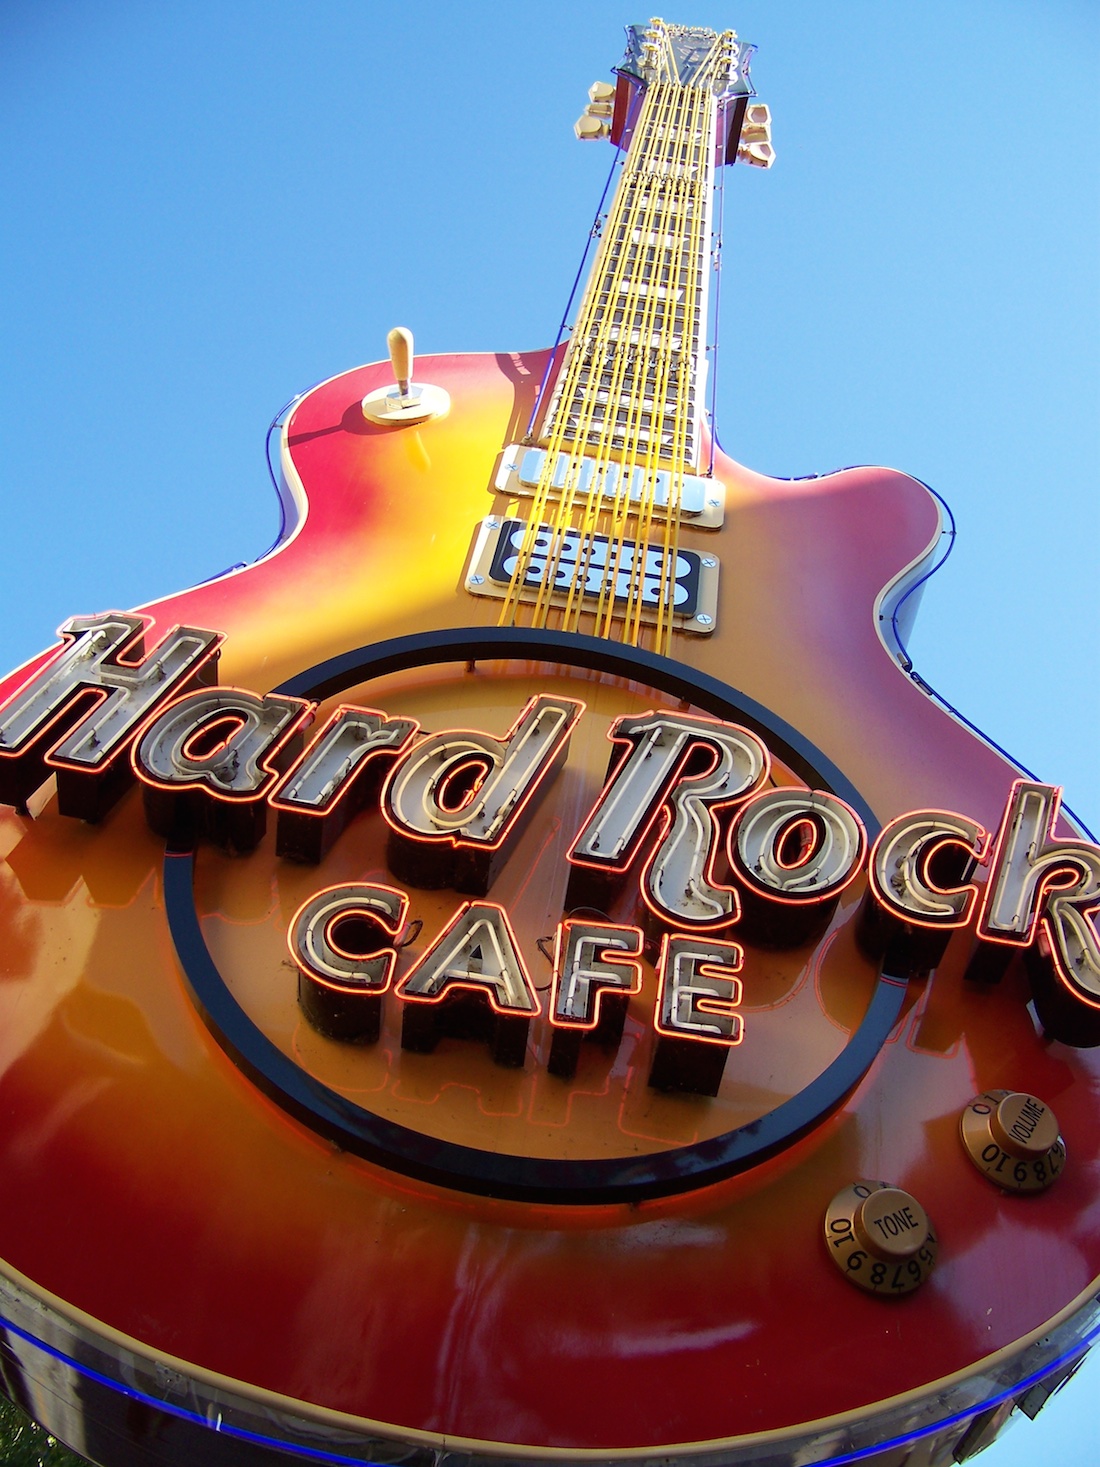 Hard Rock Cafe is coming to Lagos!